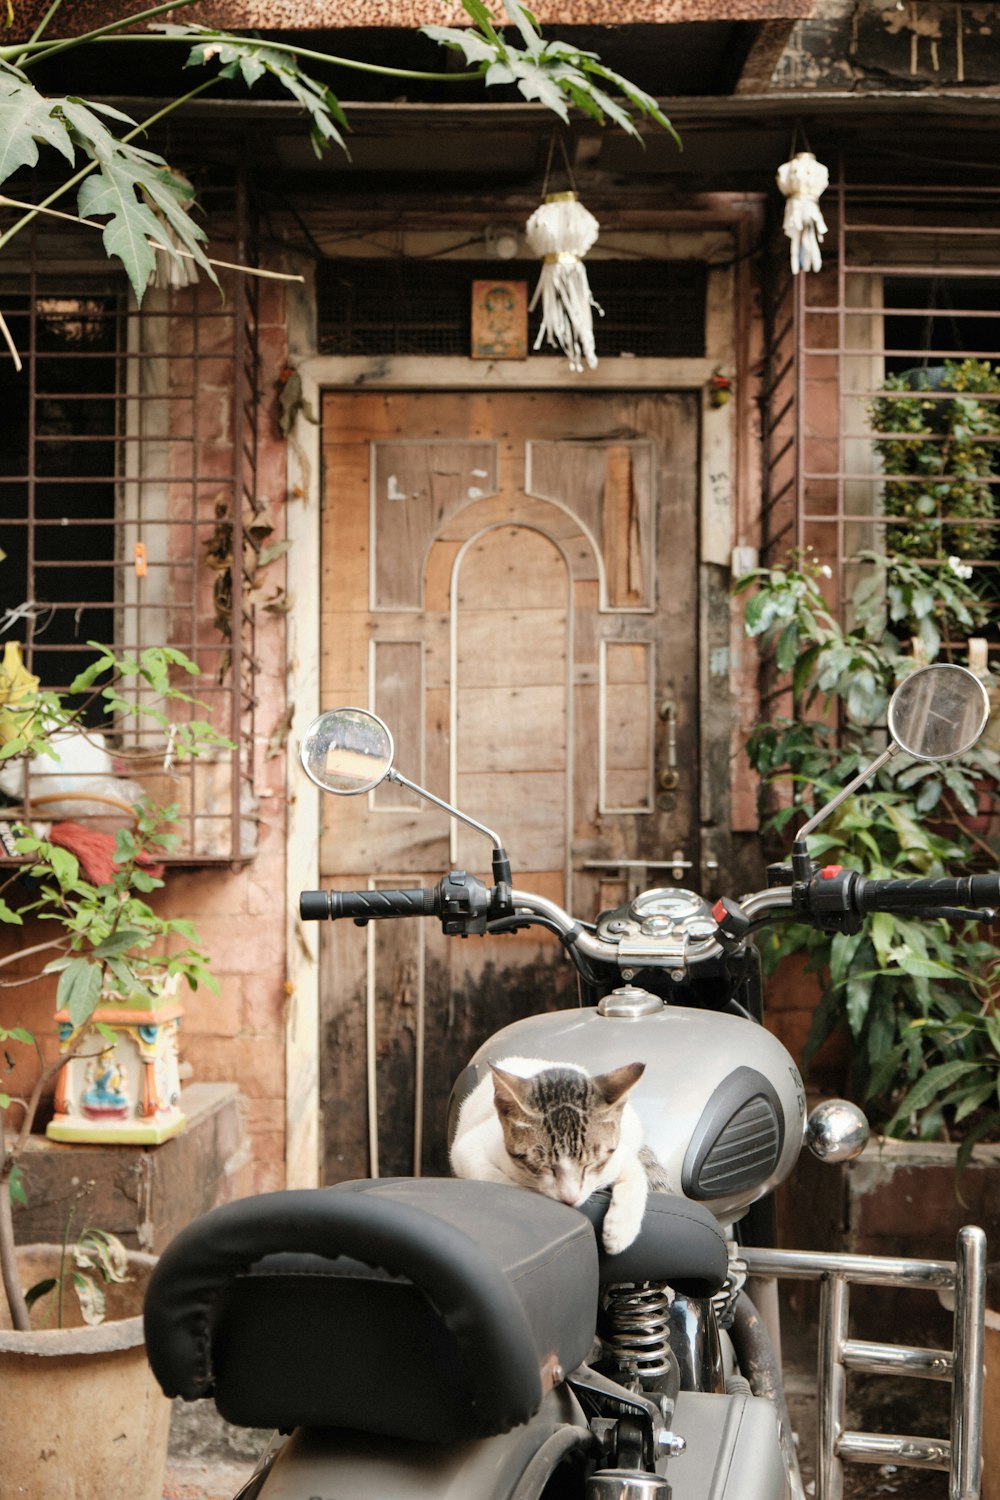 a cat sitting on the seat of a motorcycle